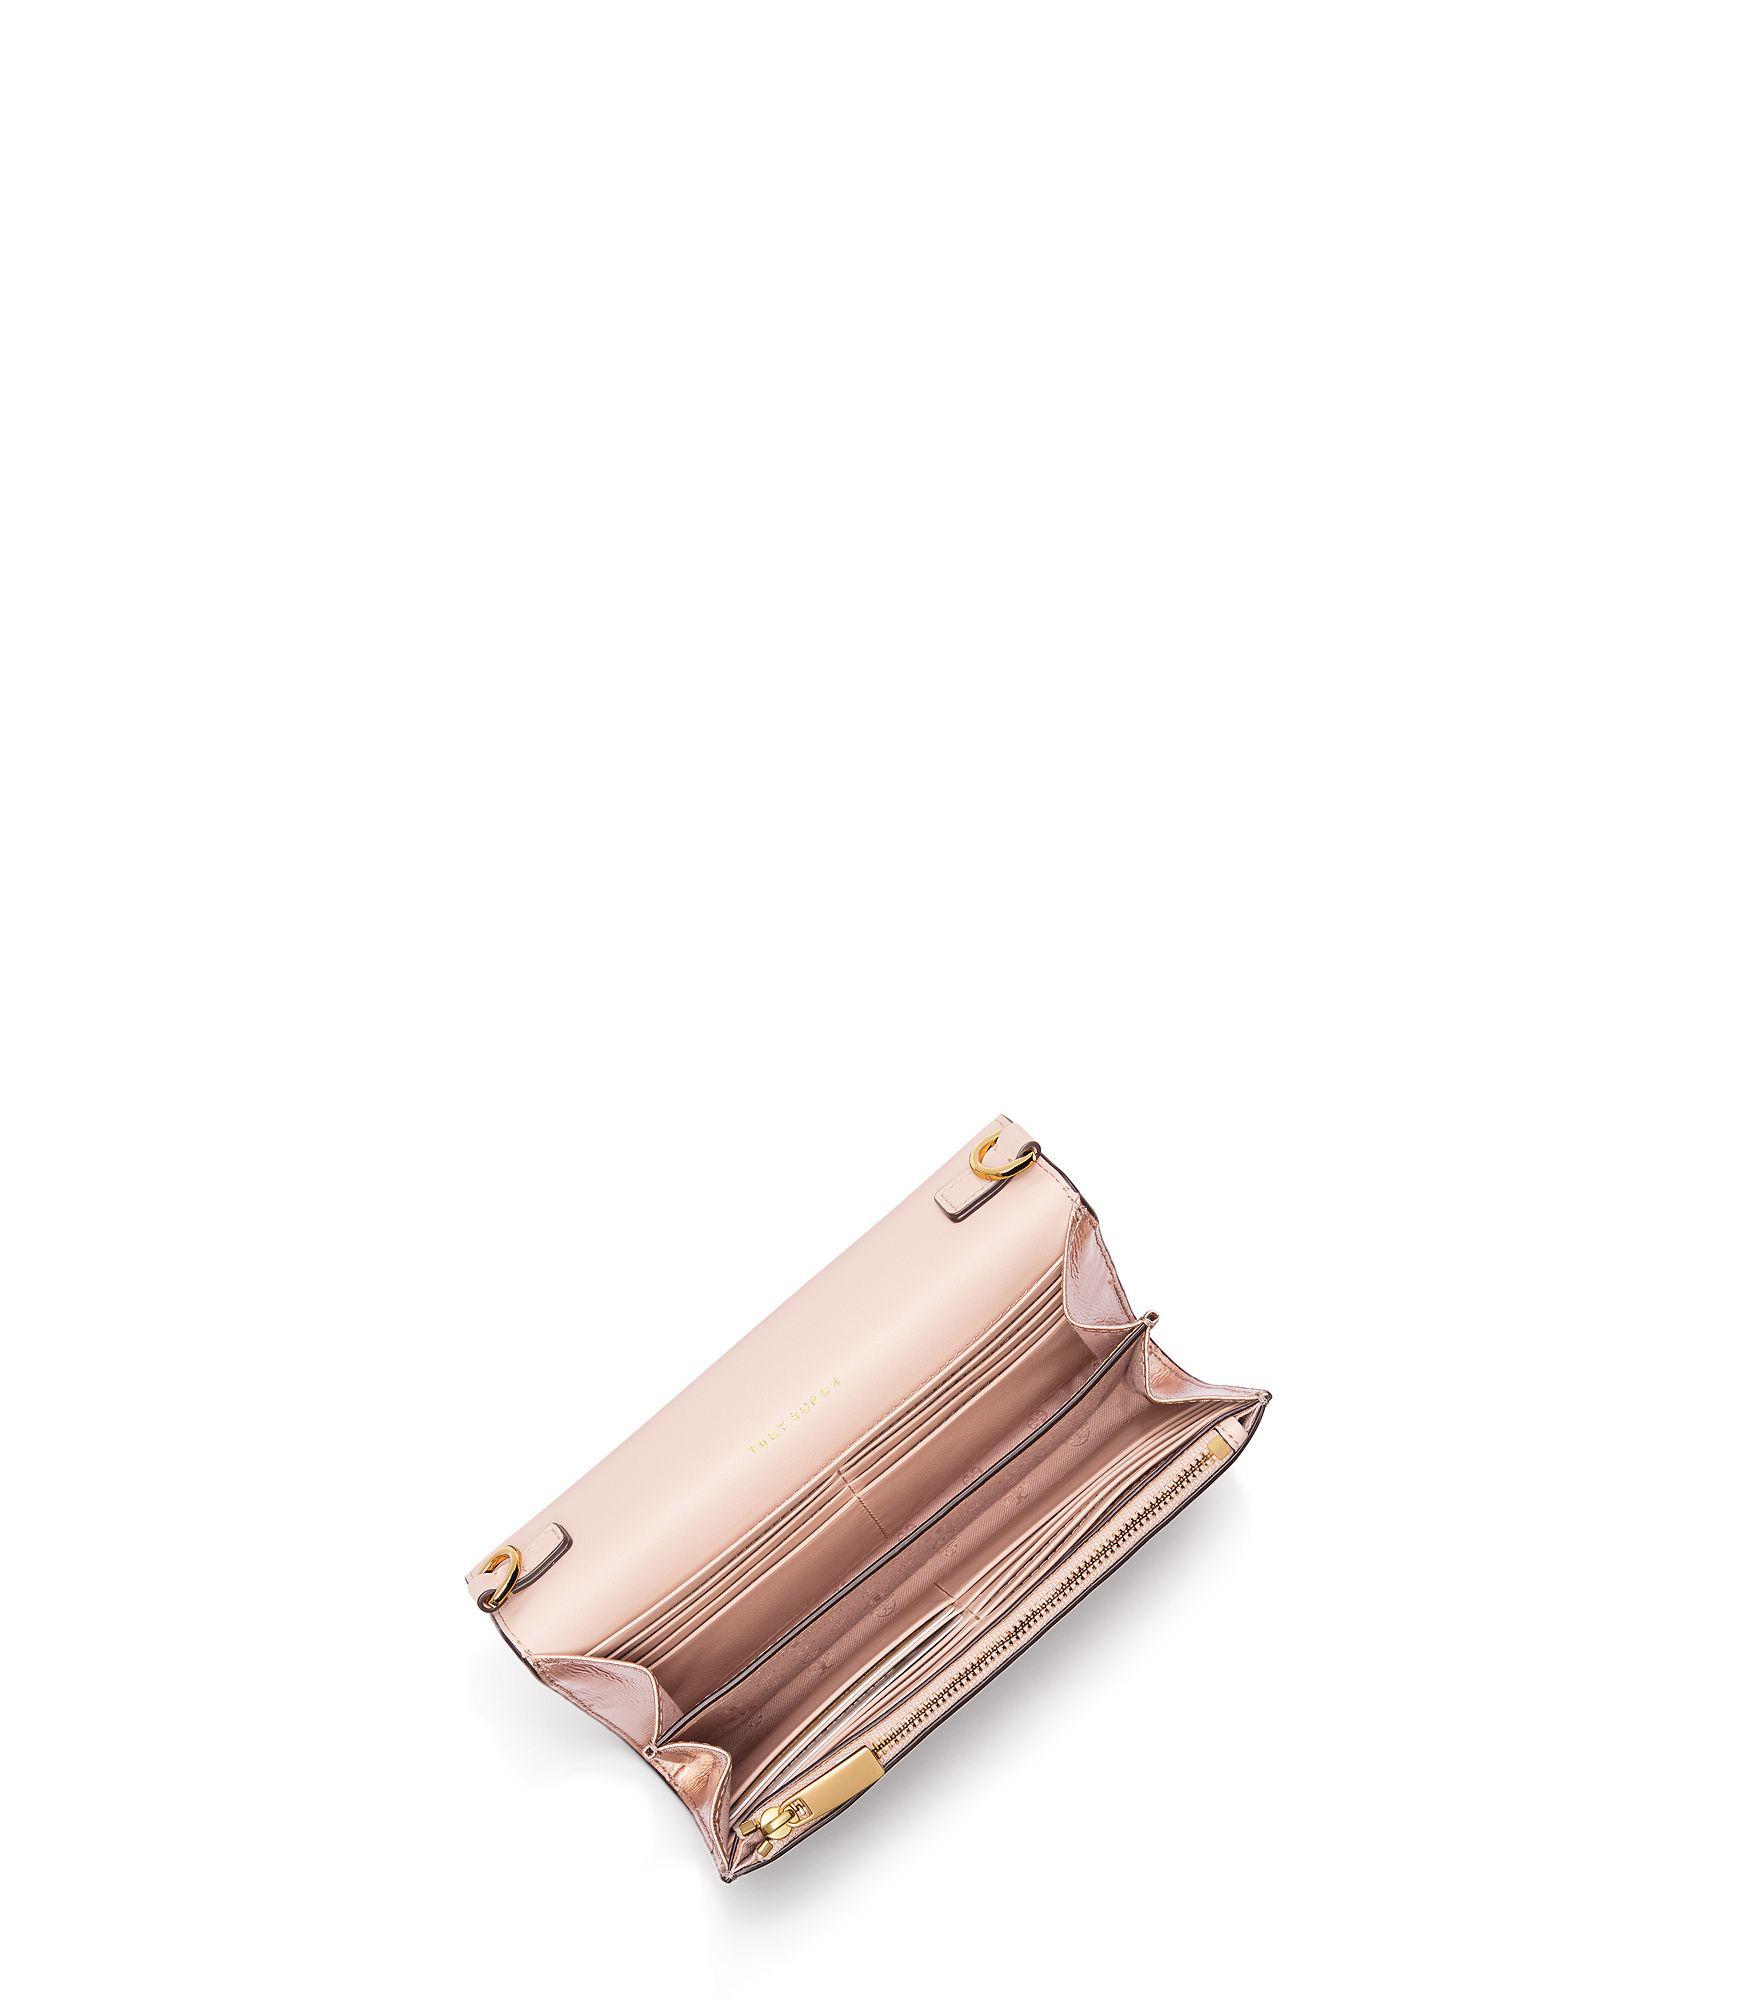 Tory Burch Leather Robinson Metallic Chain Wallet in Light Rose Gold (Pink) - Lyst